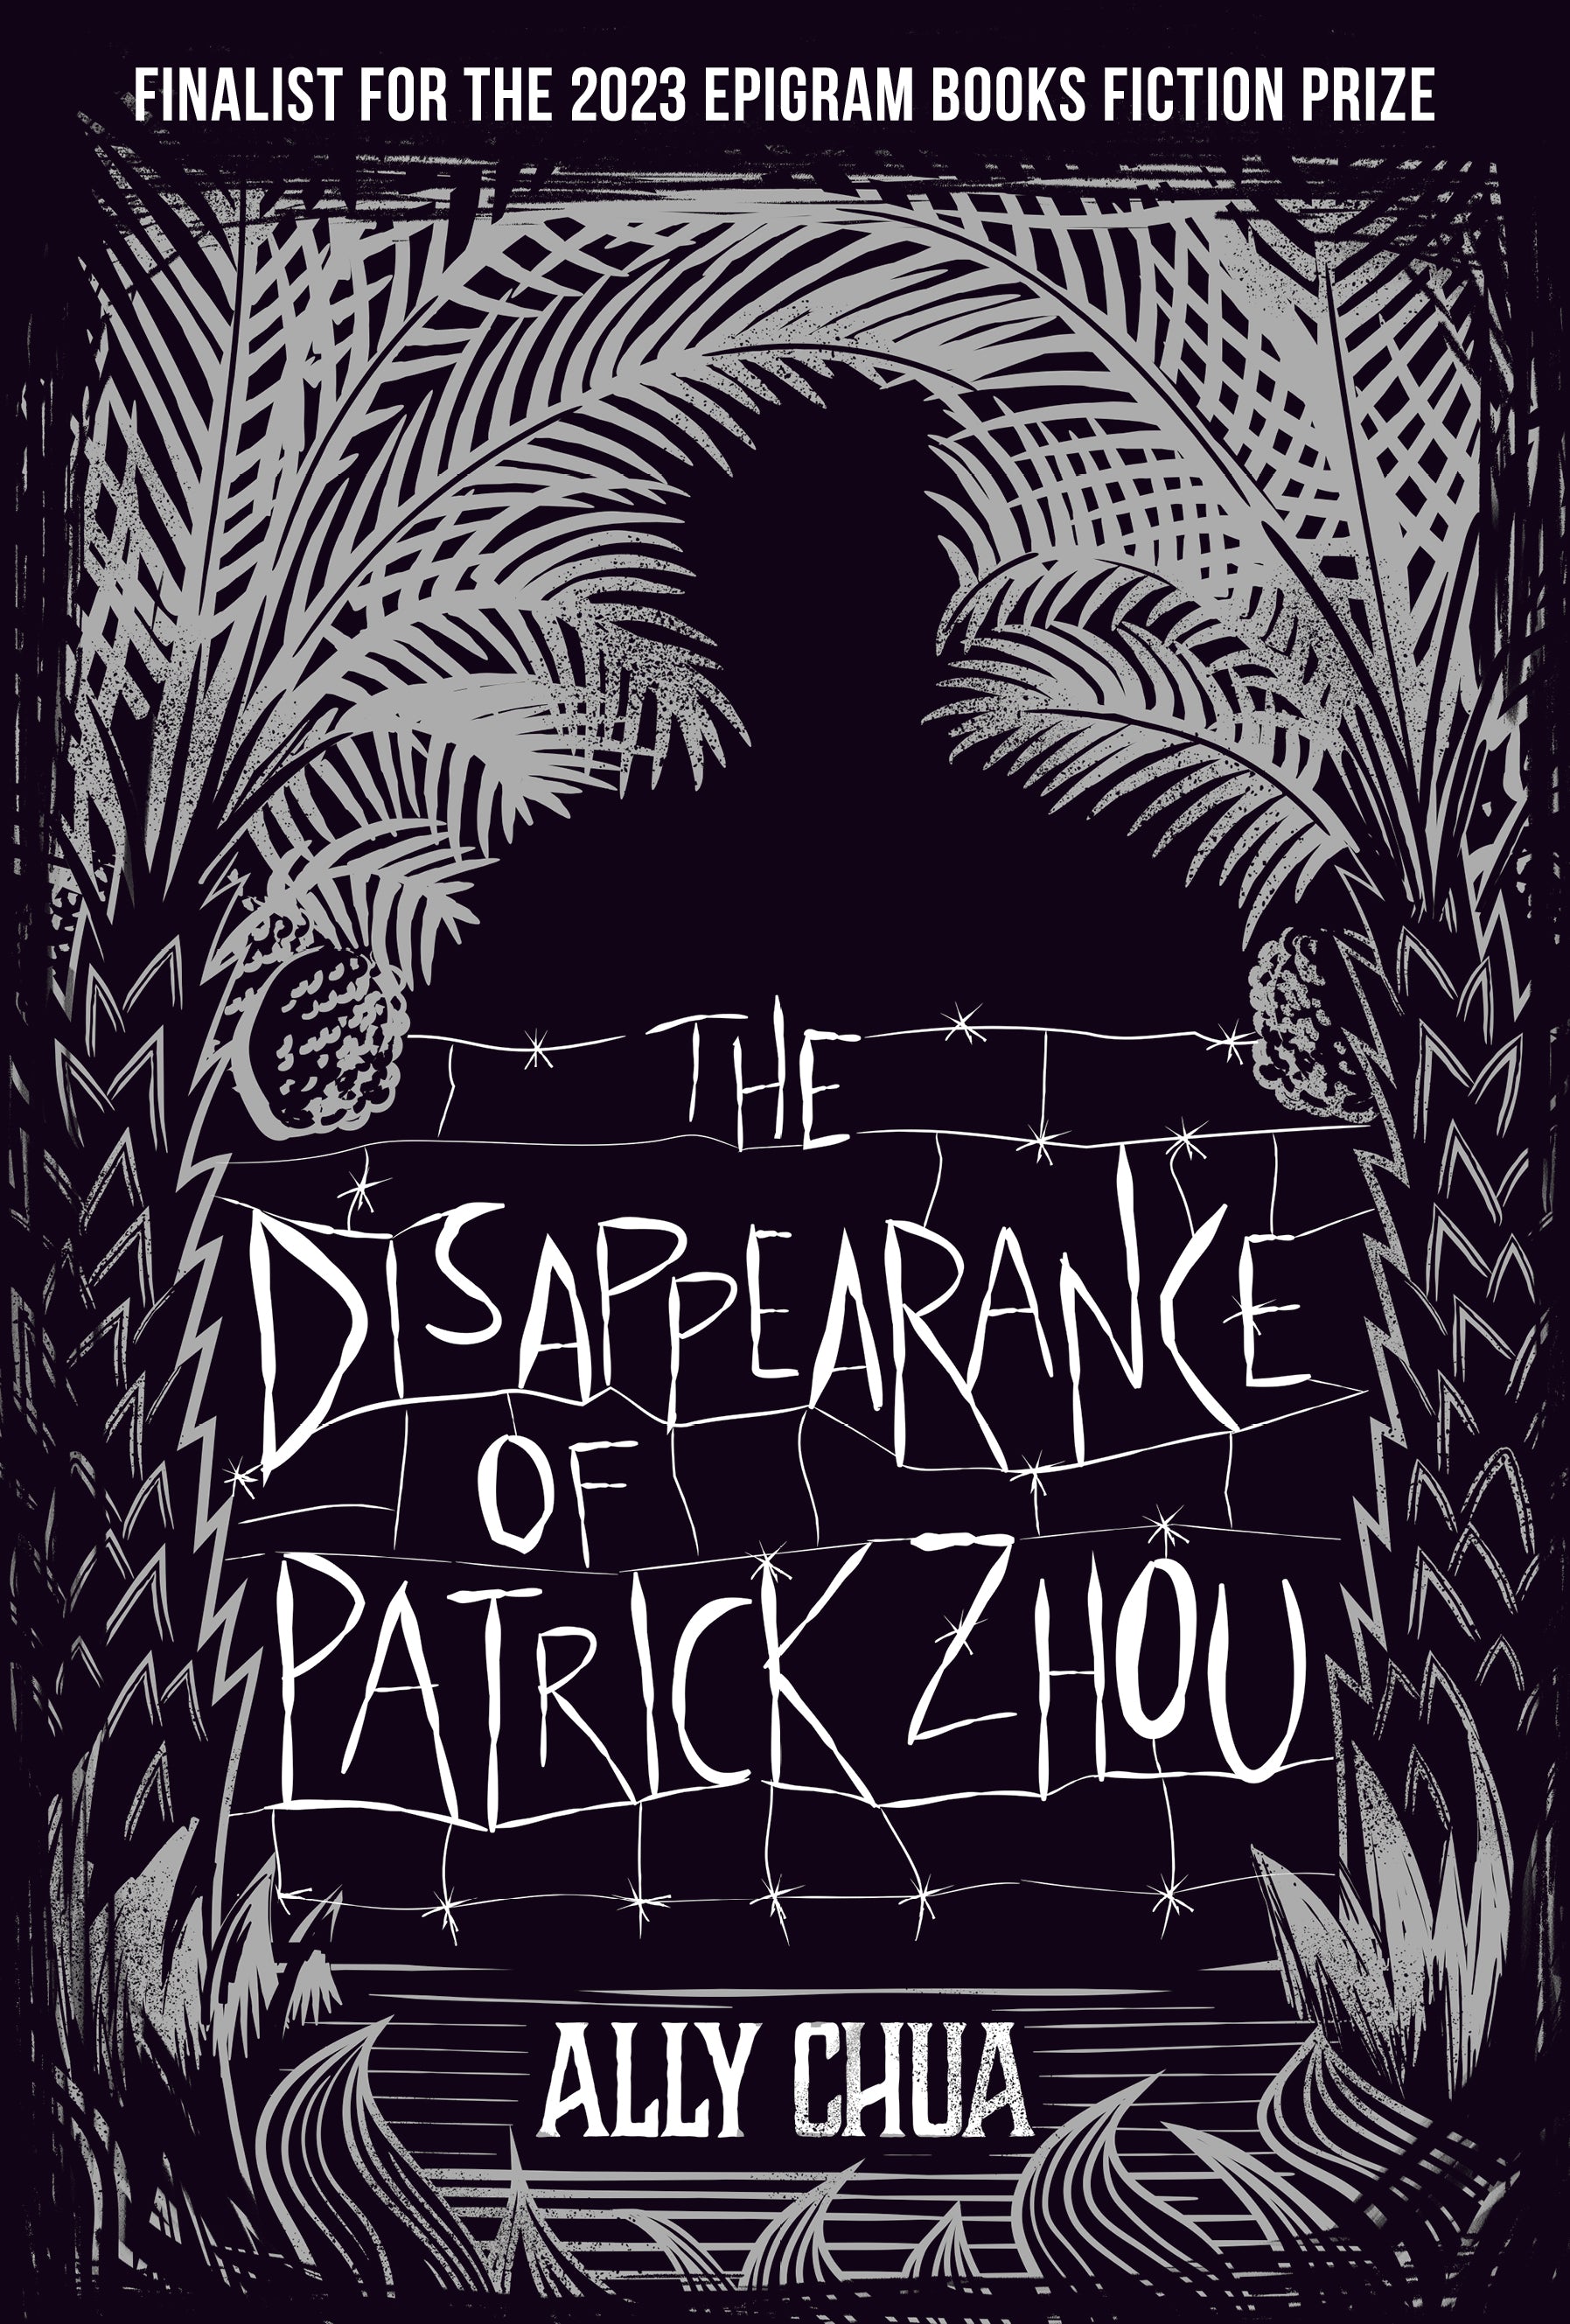 The Disappearance of Patrick Zhou